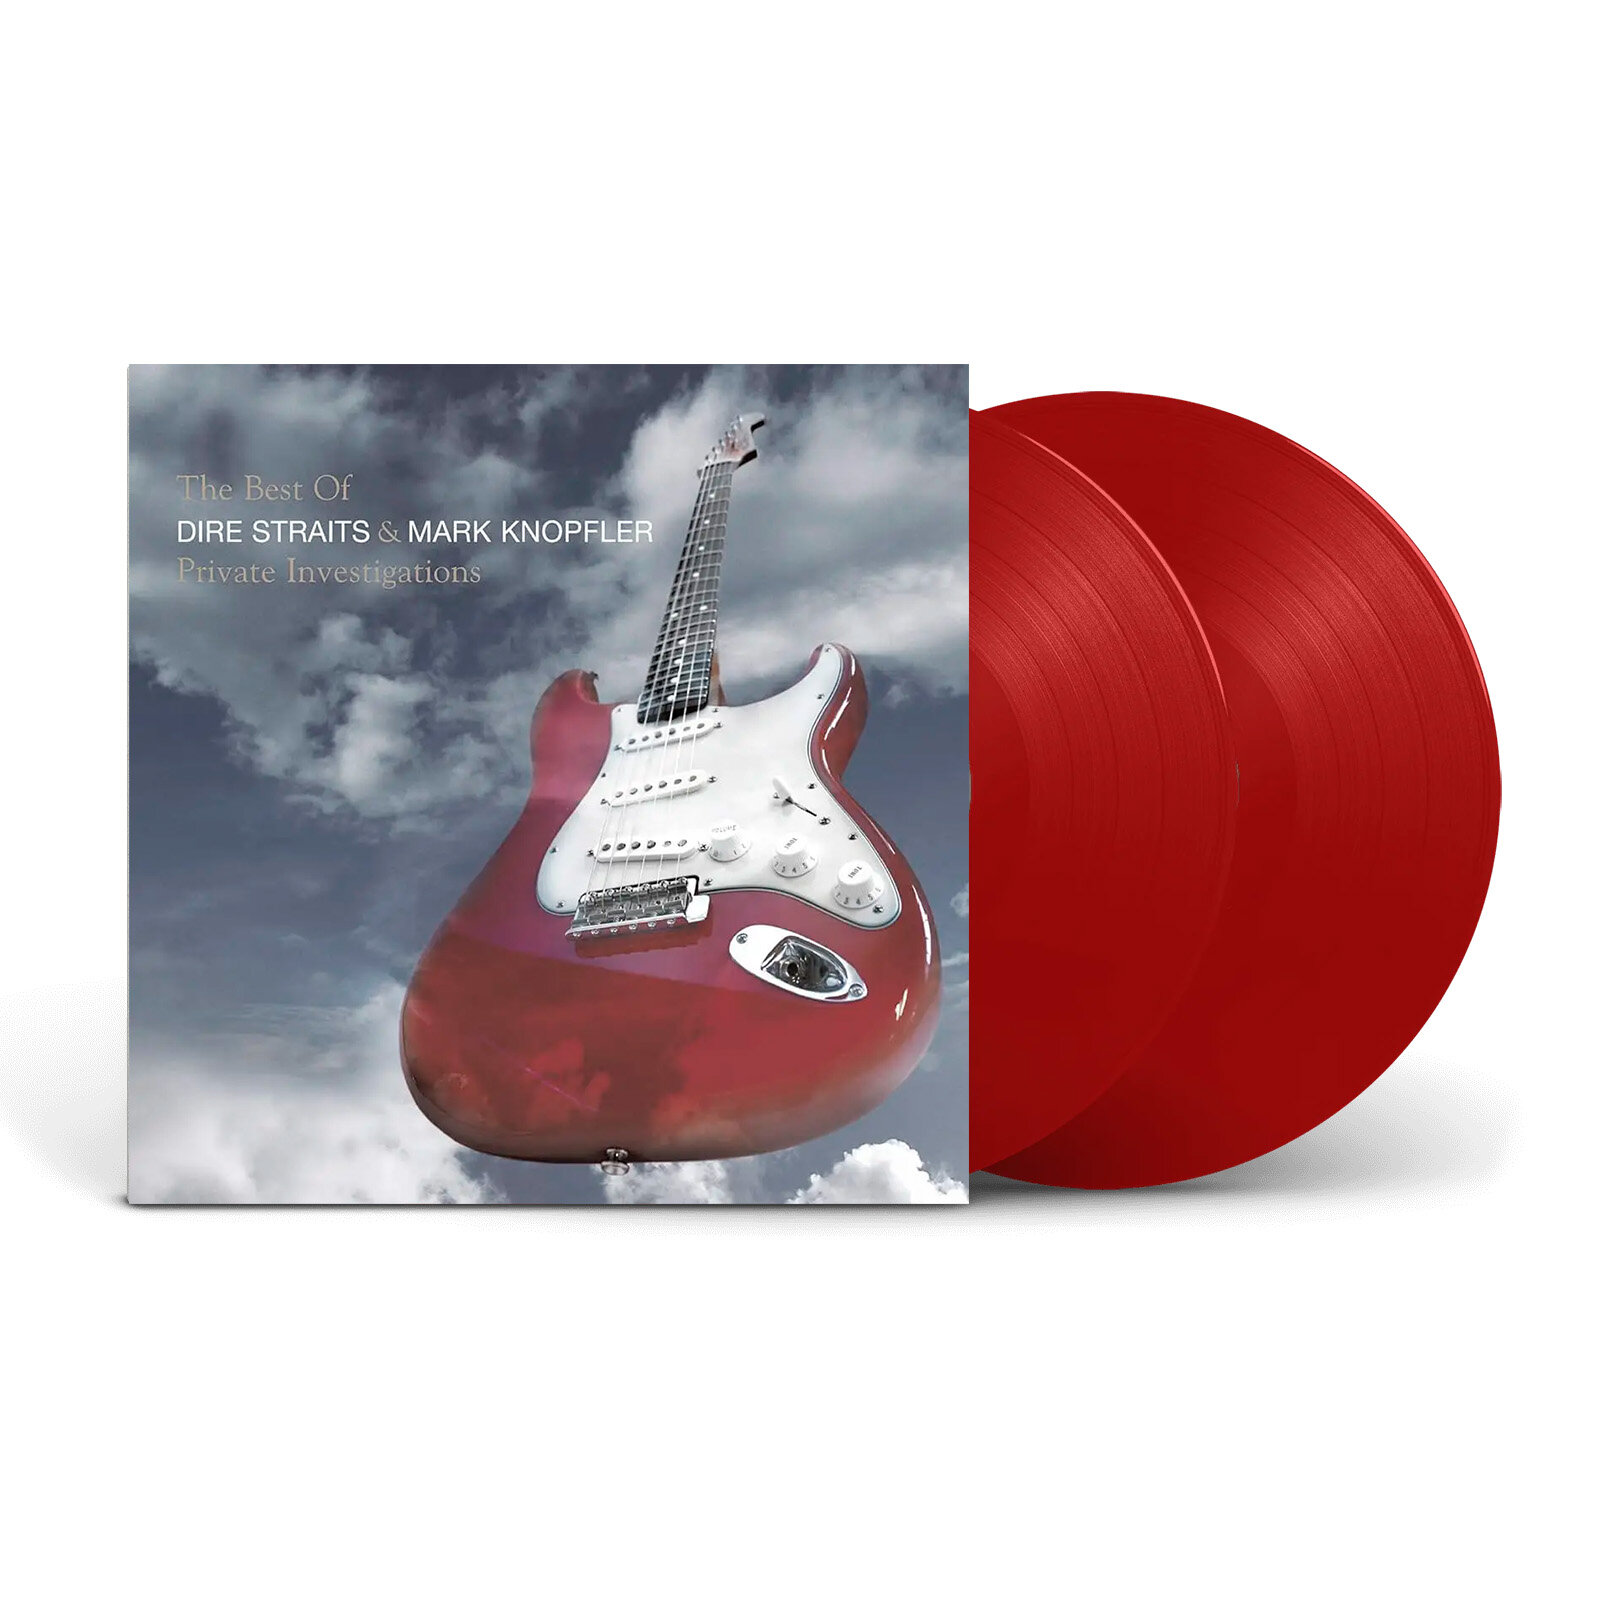 DIRE STRAITS & MARK KNOPFLER - PRIVATE INVESTIGATIONS (2LP the best of, red) виниловая пластинка